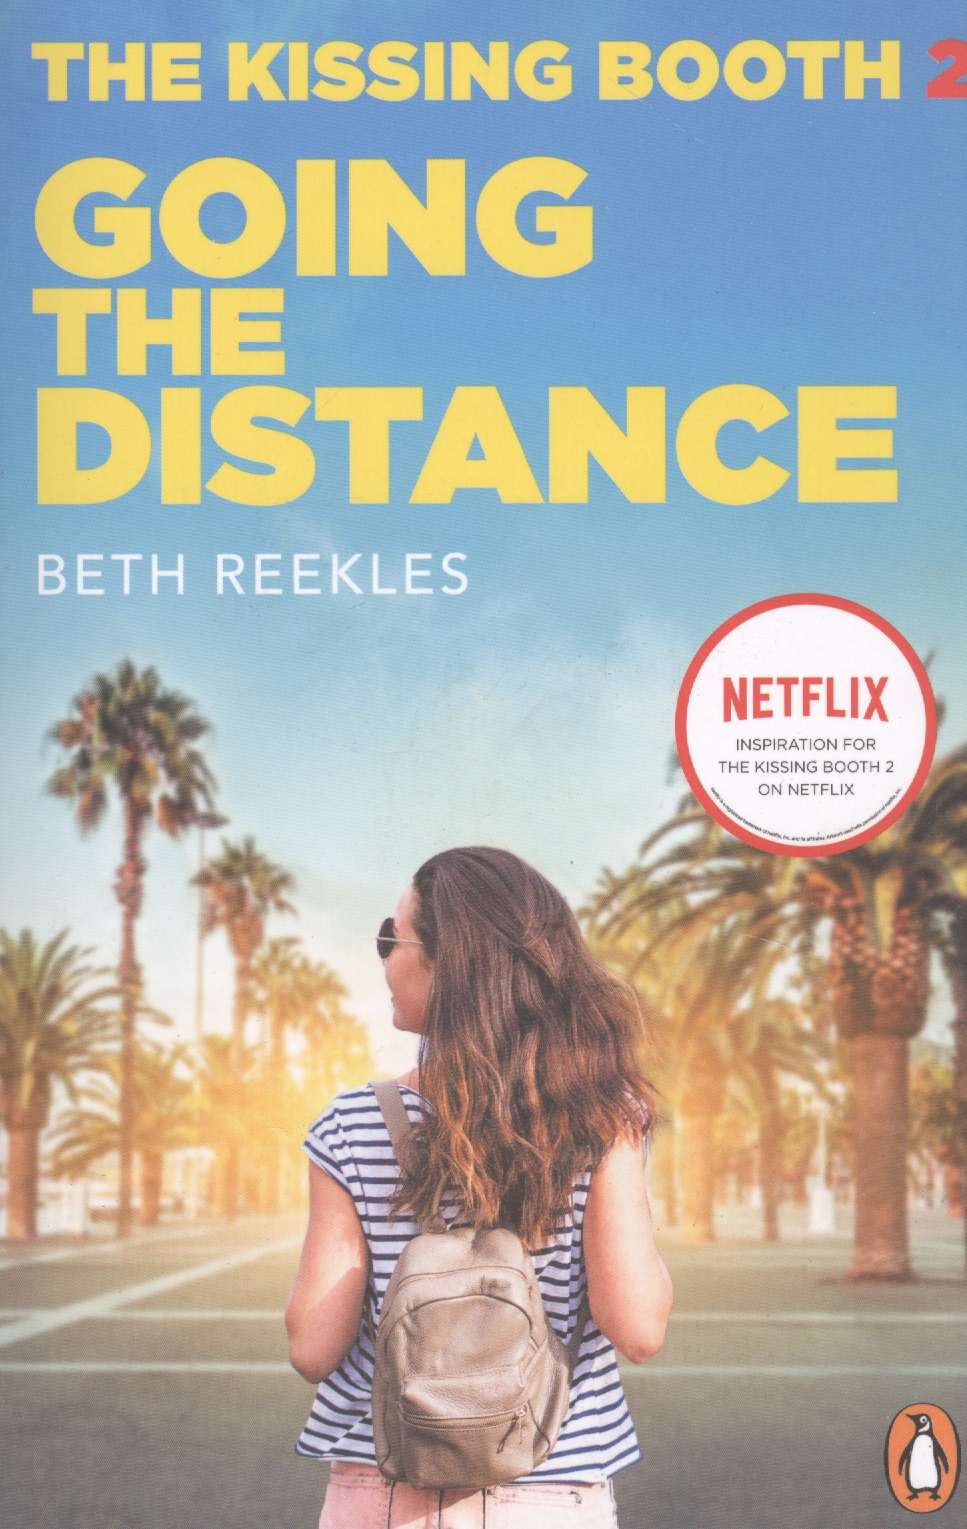 Reekles Beth The Kissing Booth 2: Going the Distance